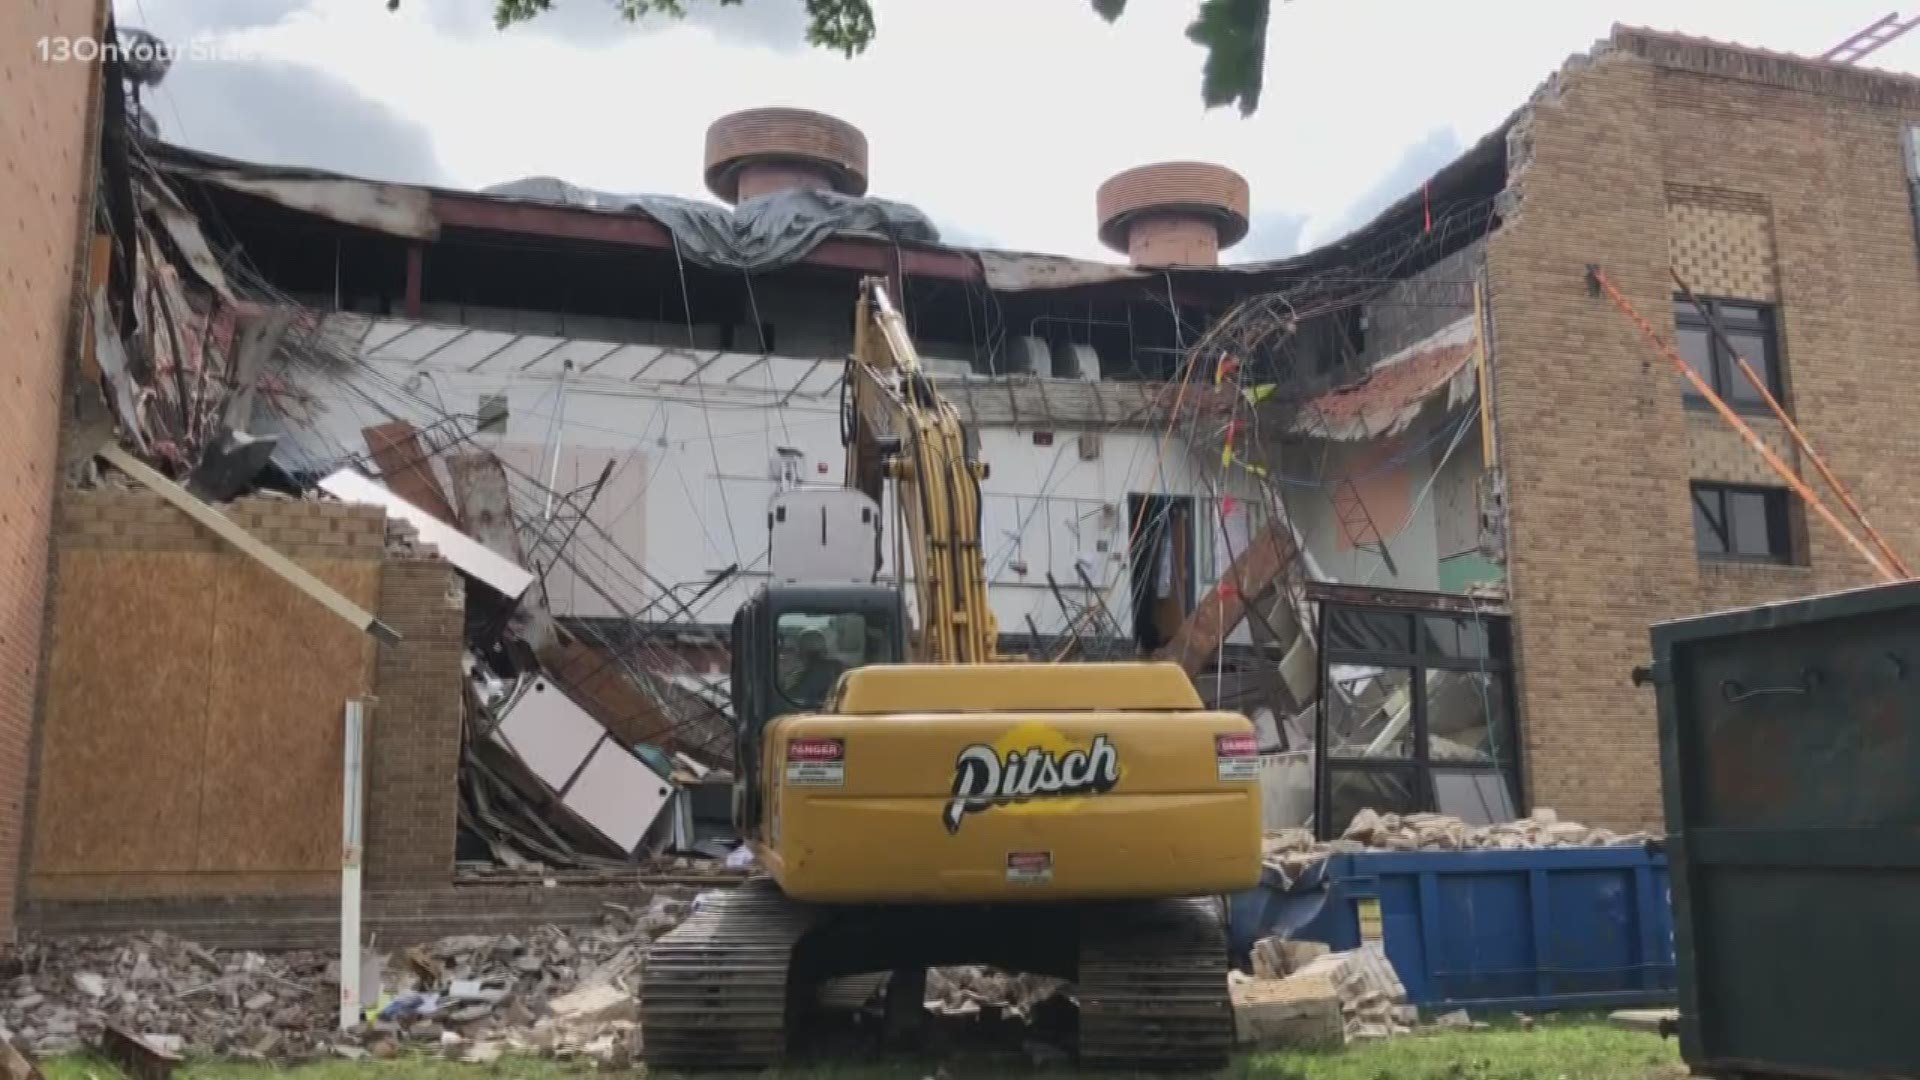 Another portion of Lee Middle & High School collapsed over the weekend. Work continued early Monday morning to remove debris and demolish what was damaged for future renovation.